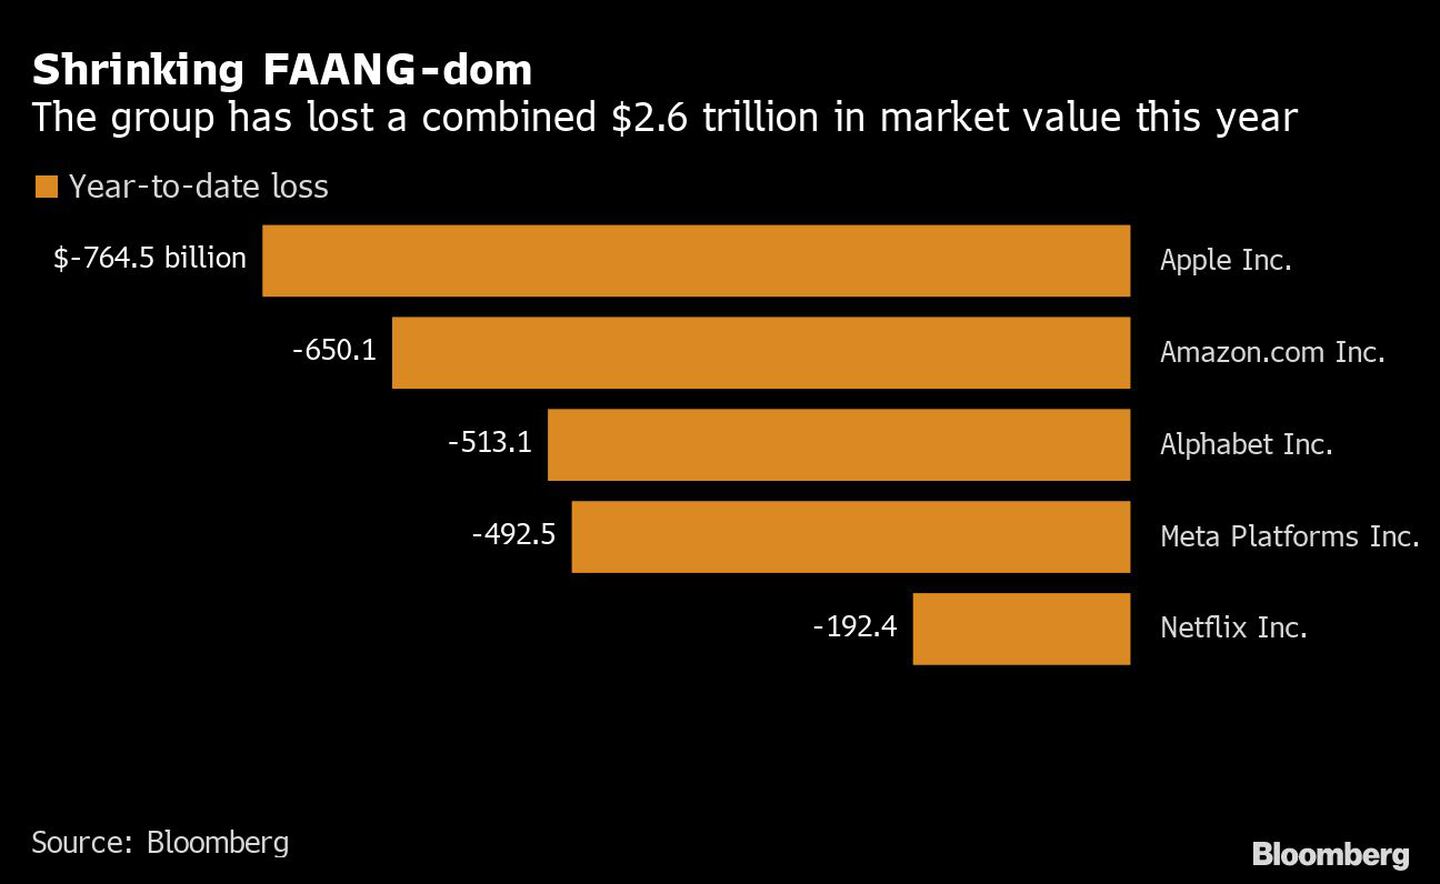 Shrinking FAANG-dom | The group has lost a combined $2.6 trillion in market value this yeardfd